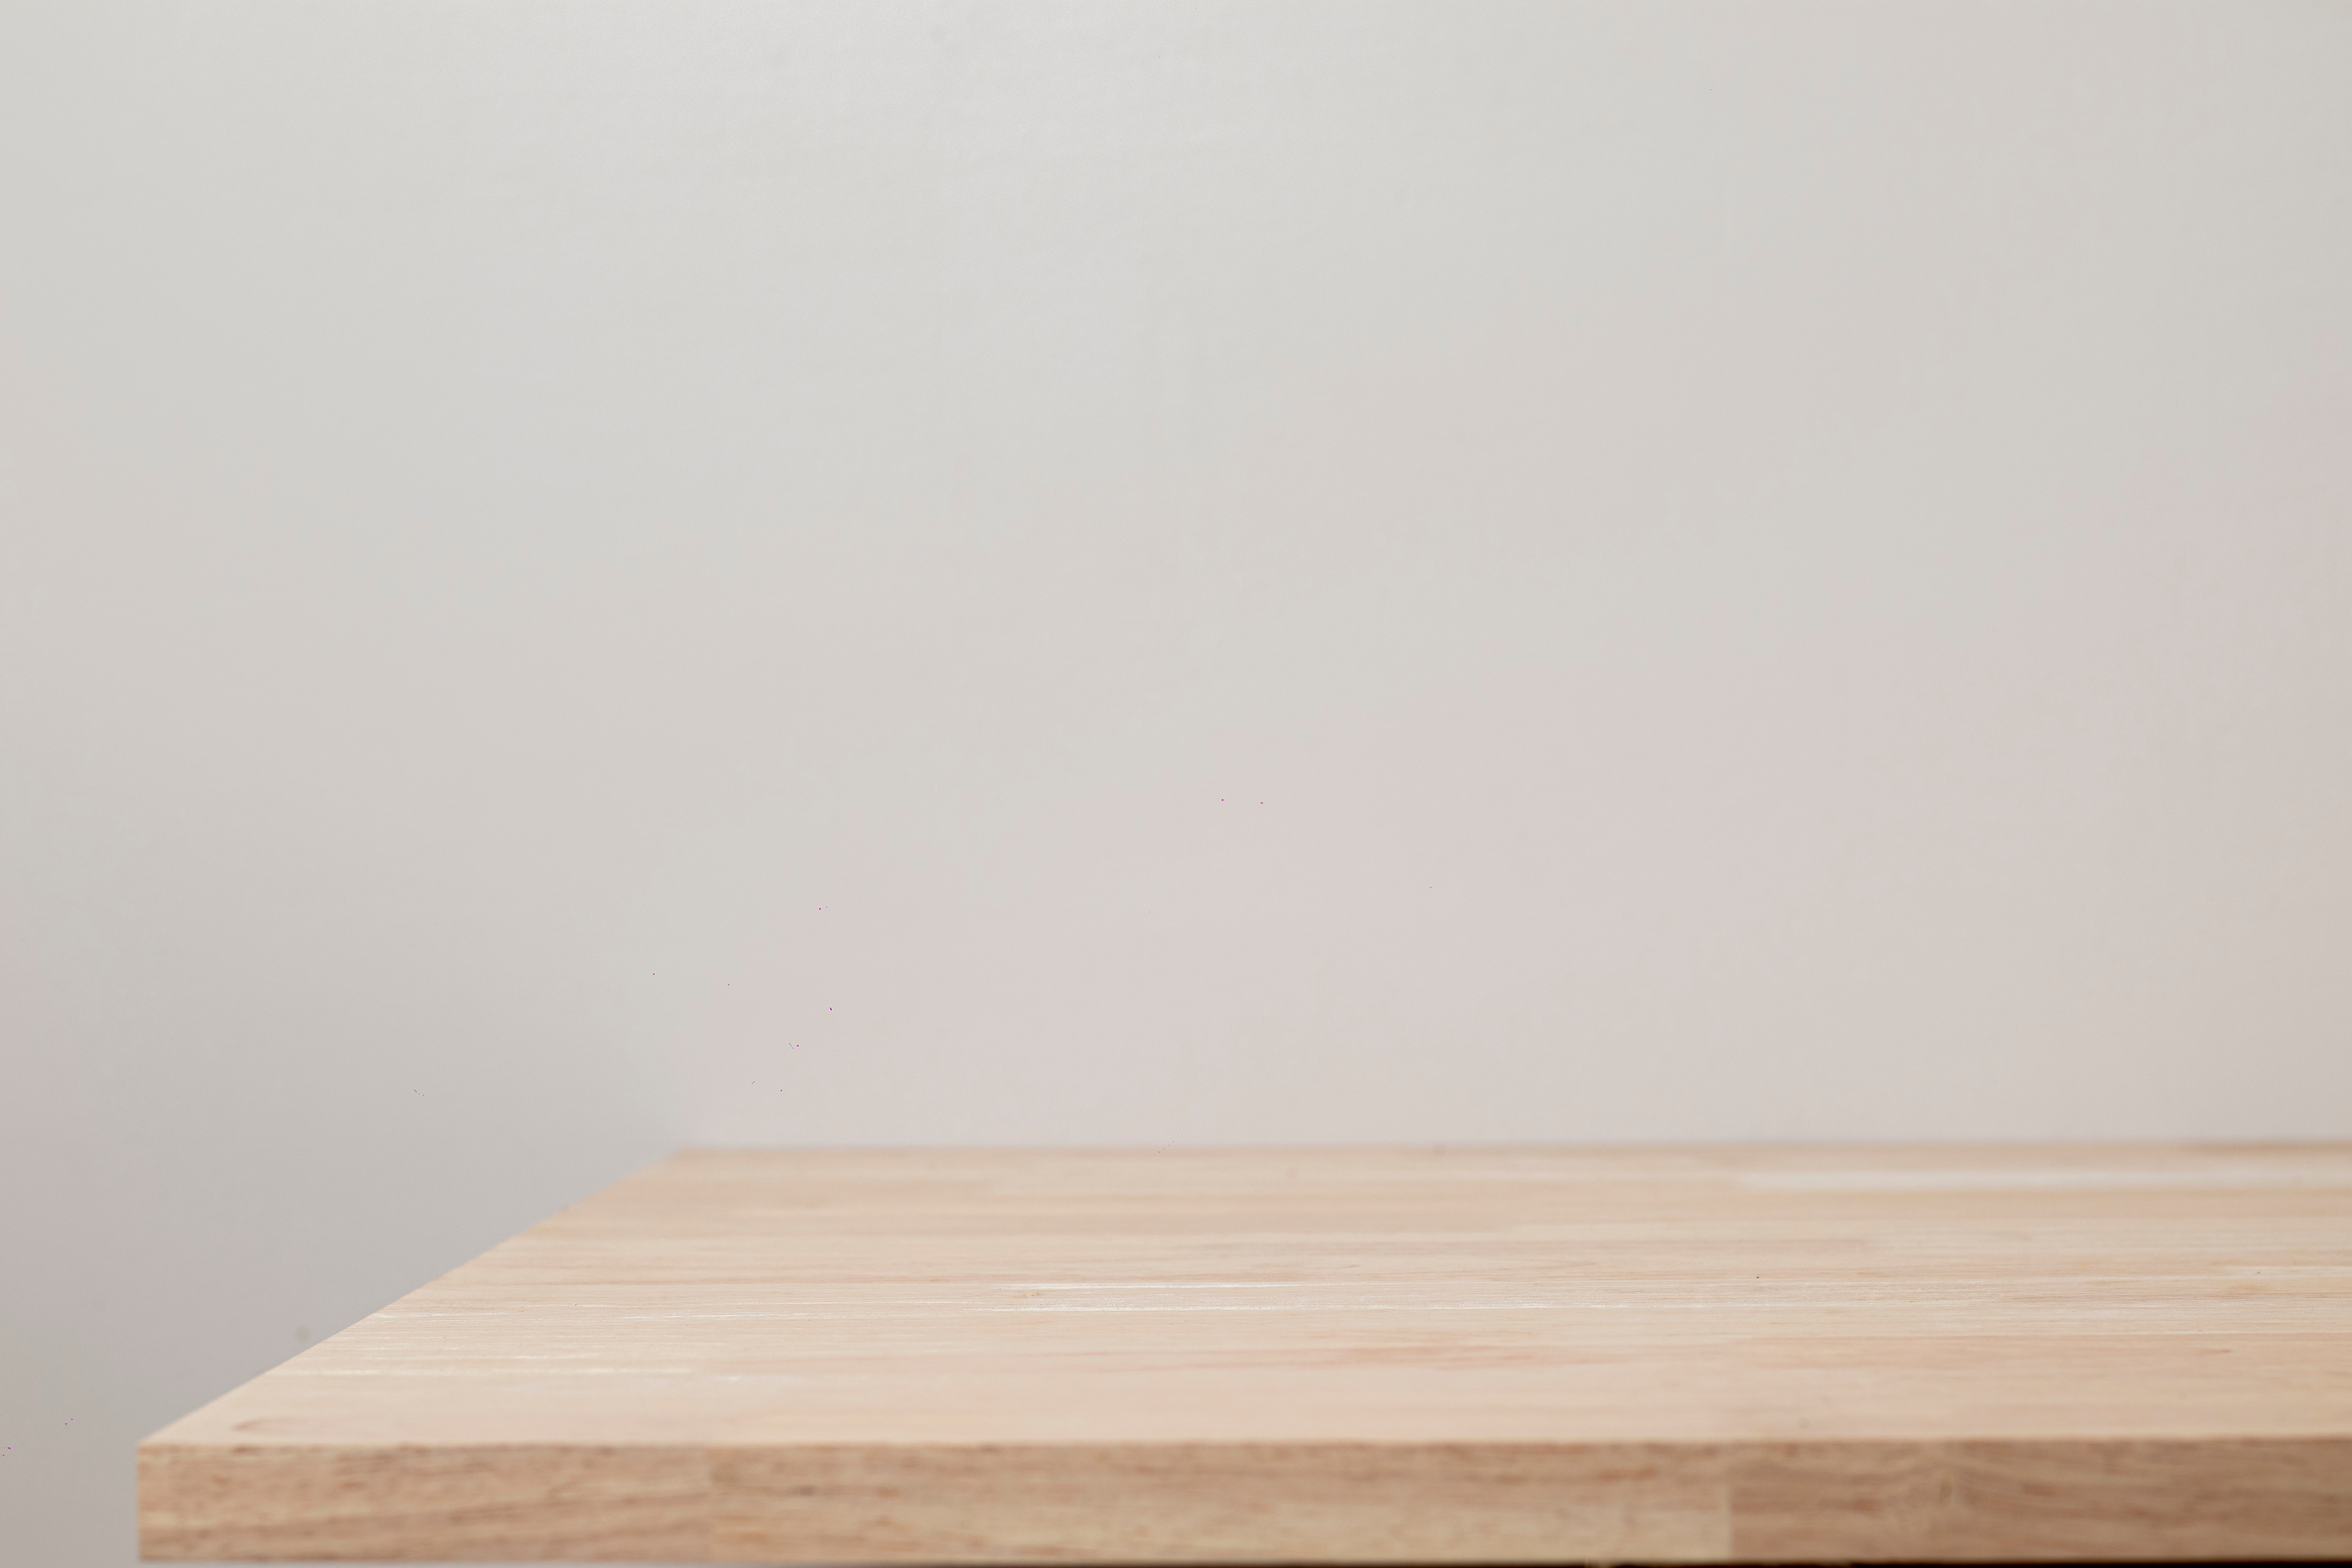 Product Backdrop, Empty Wooden Table with Concrete Wall